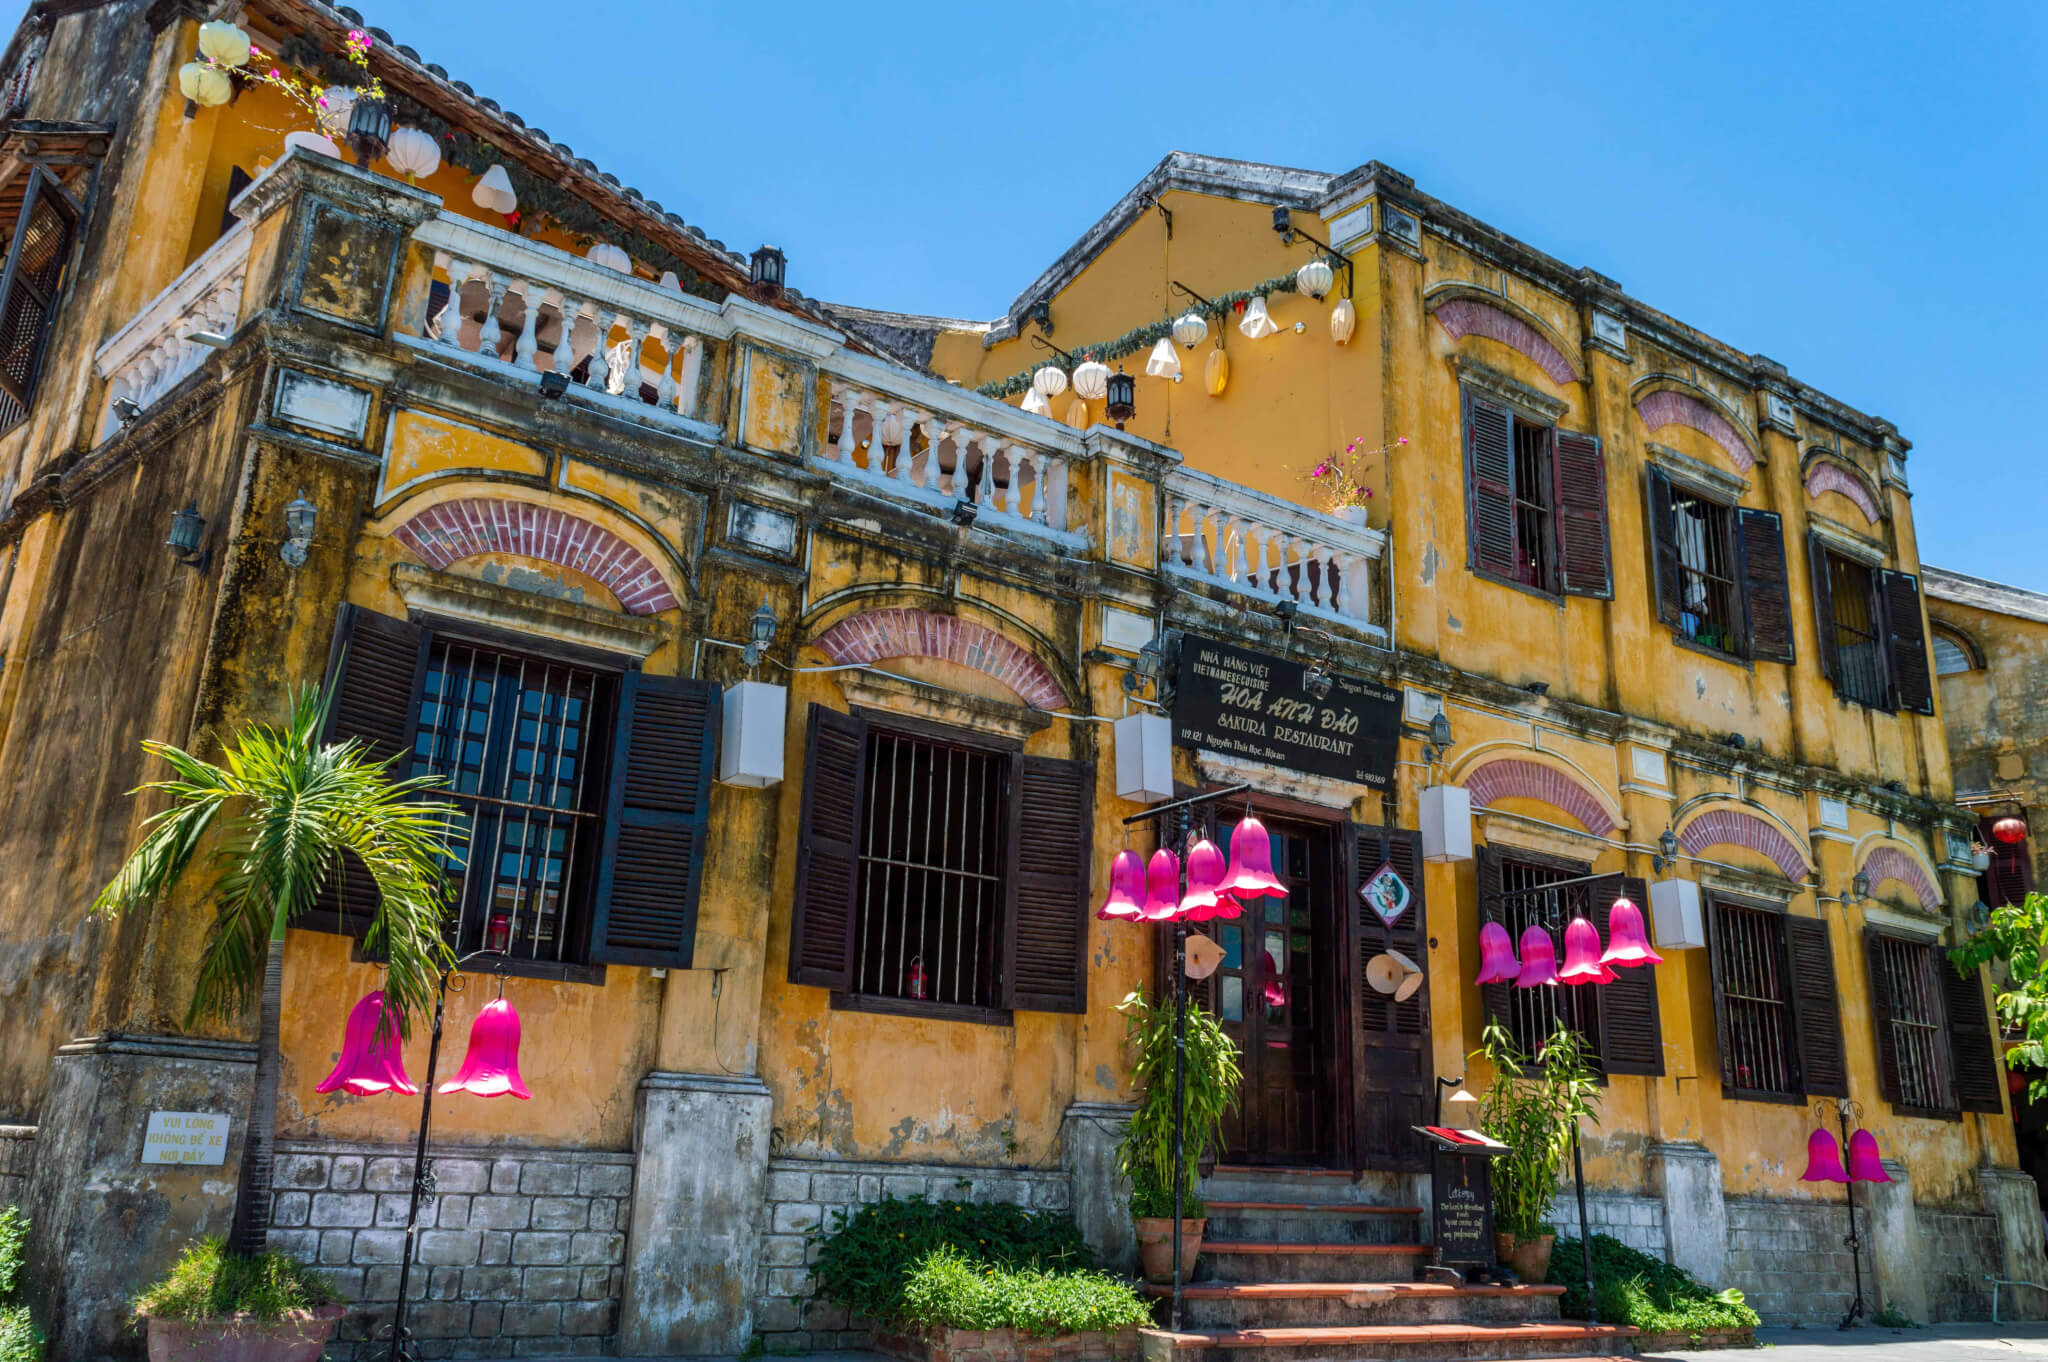 This 2 day Hoi An itinerary is a great addition to 10 days in Vietnam